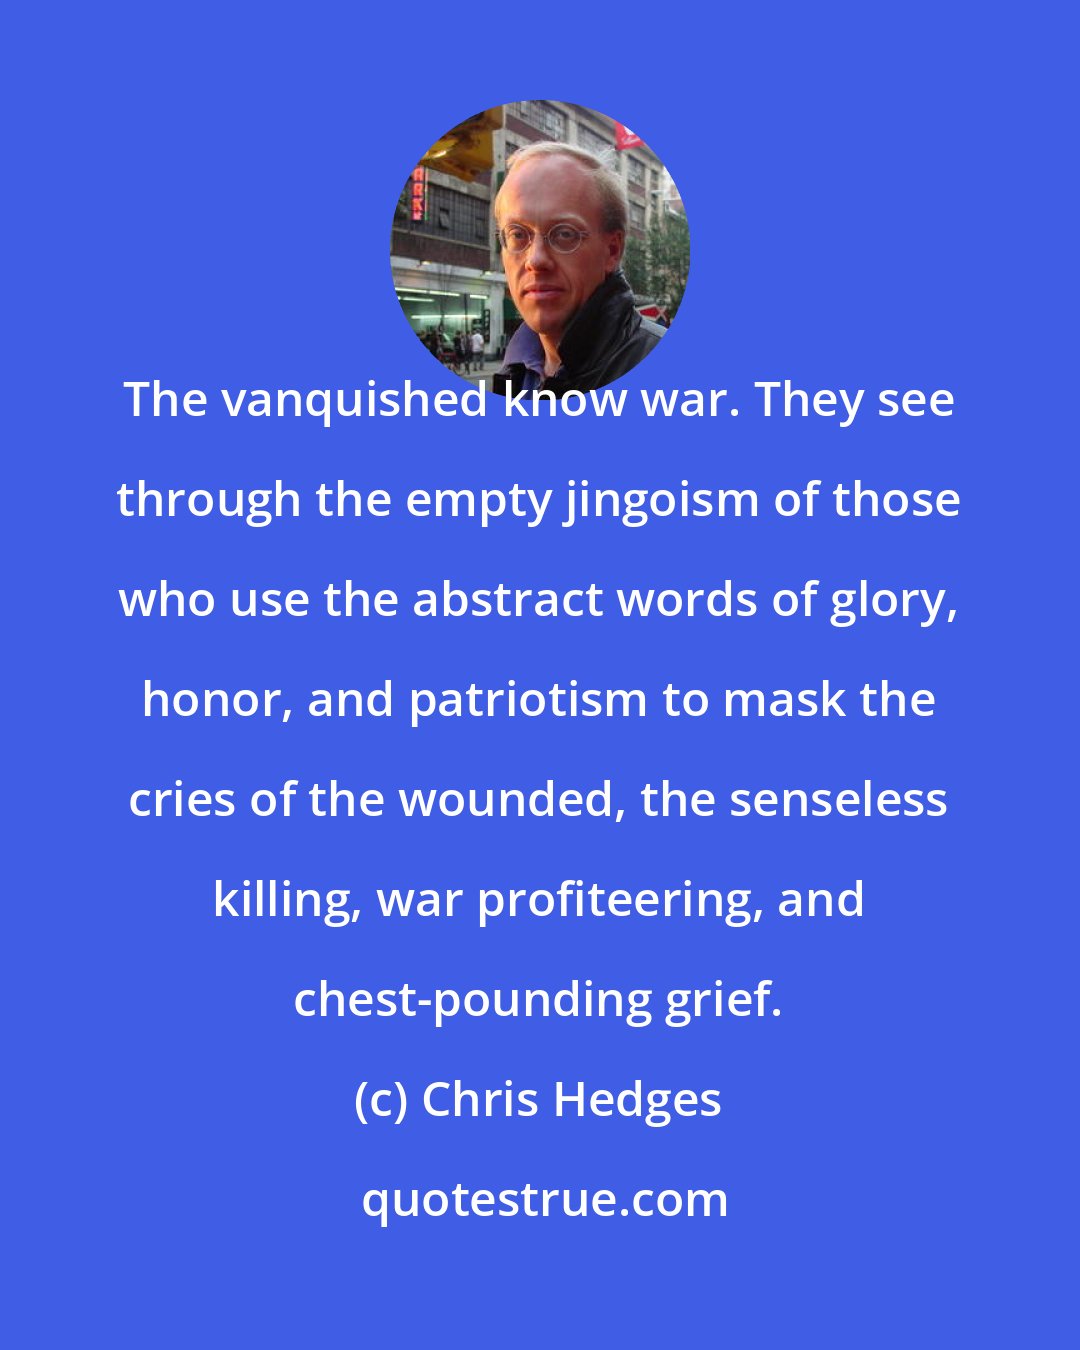 Chris Hedges: The vanquished know war. They see through the empty jingoism of those who use the abstract words of glory, honor, and patriotism to mask the cries of the wounded, the senseless killing, war profiteering, and chest-pounding grief.